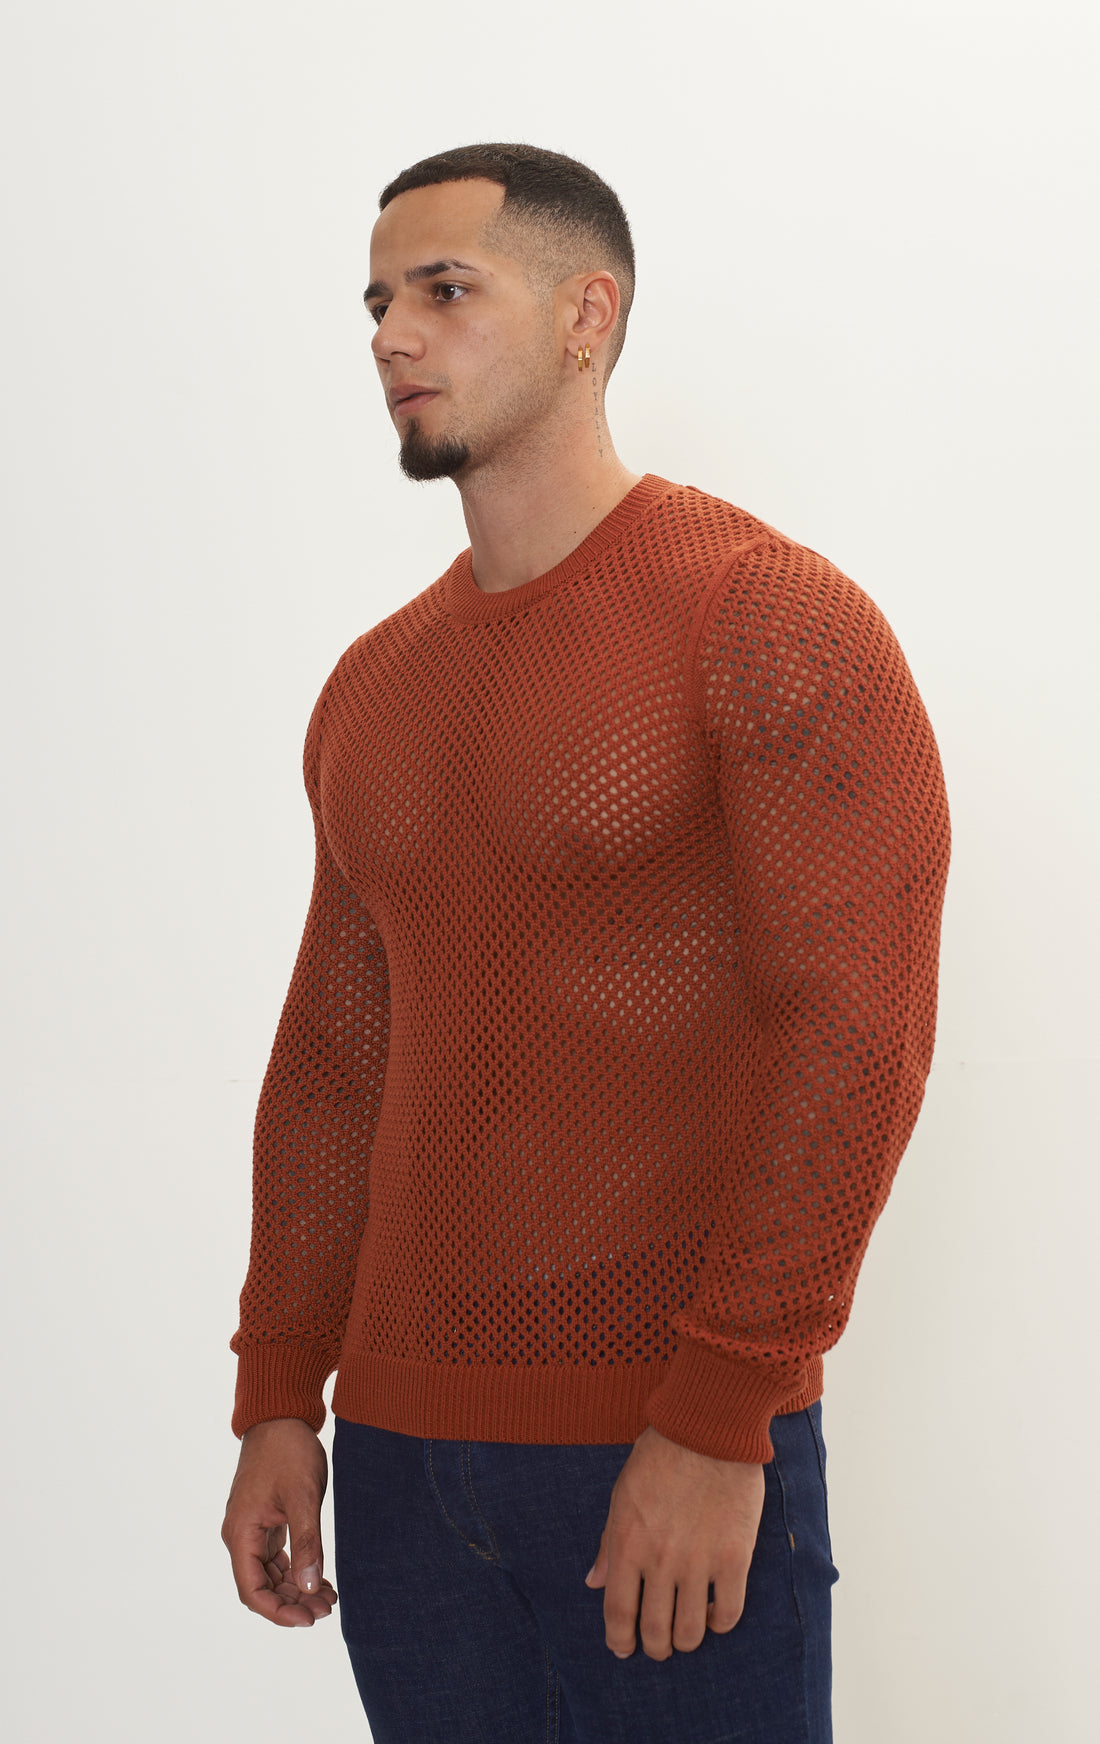 See Through Fishnet Muscle Fit Shirt - Tile